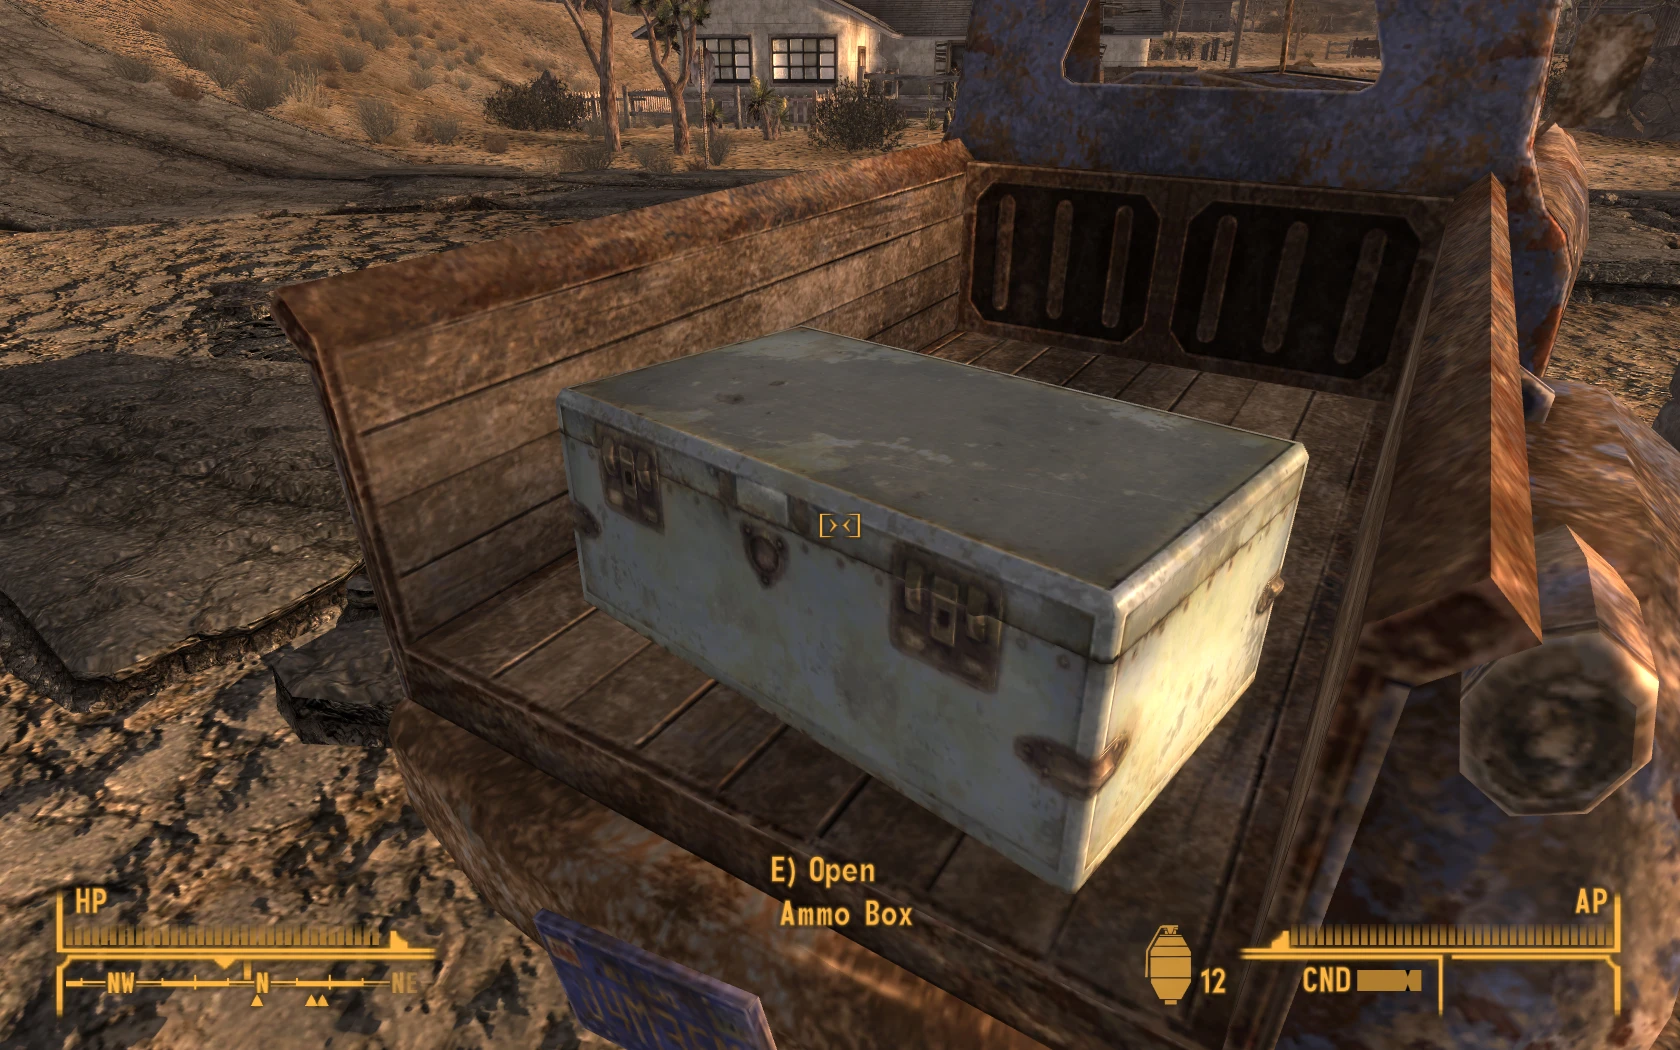 Where to find ammo fallout 4